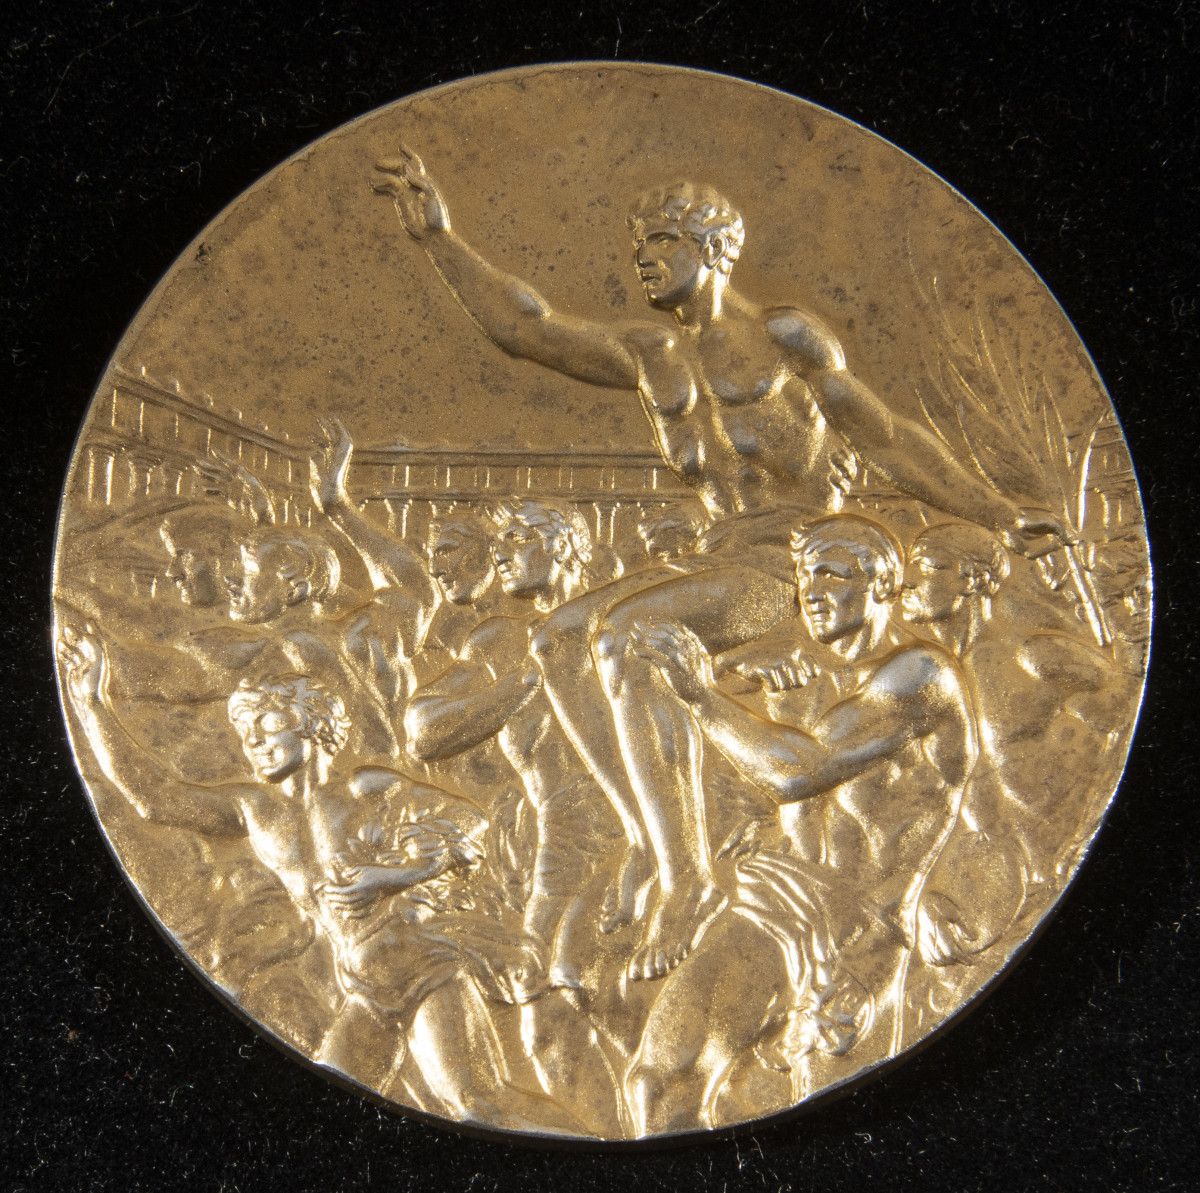 Bill Russell 1956 Olympic gold medal.